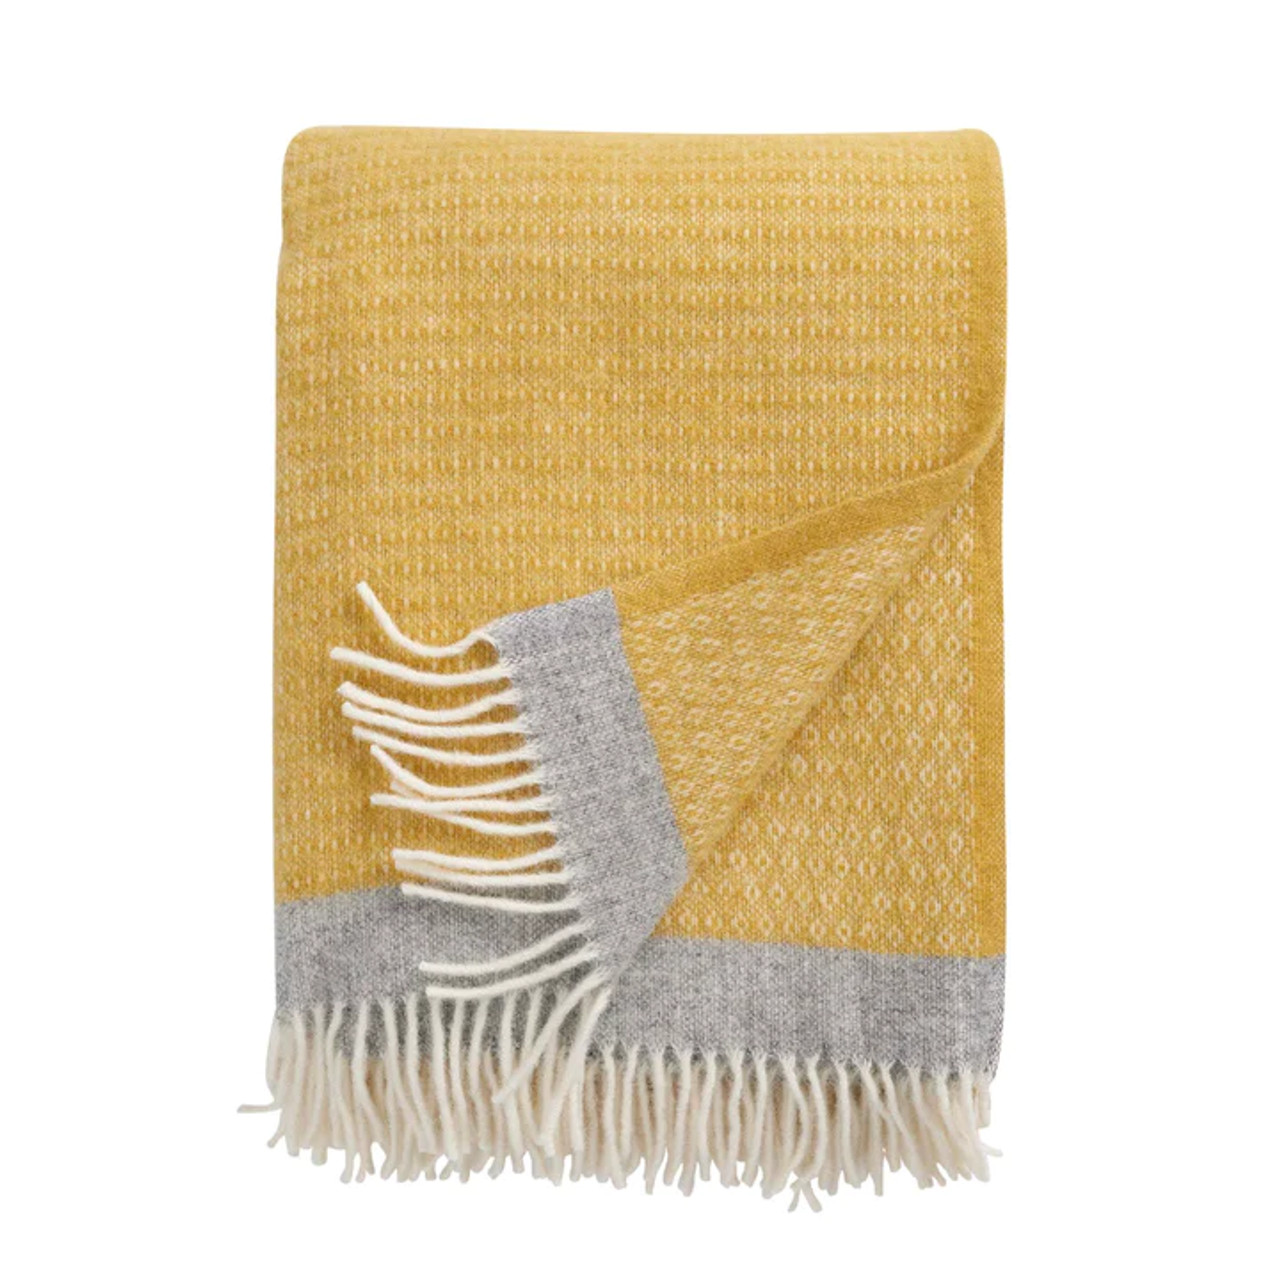 Haralds Yellow 100% Lambswool Throw *in-store